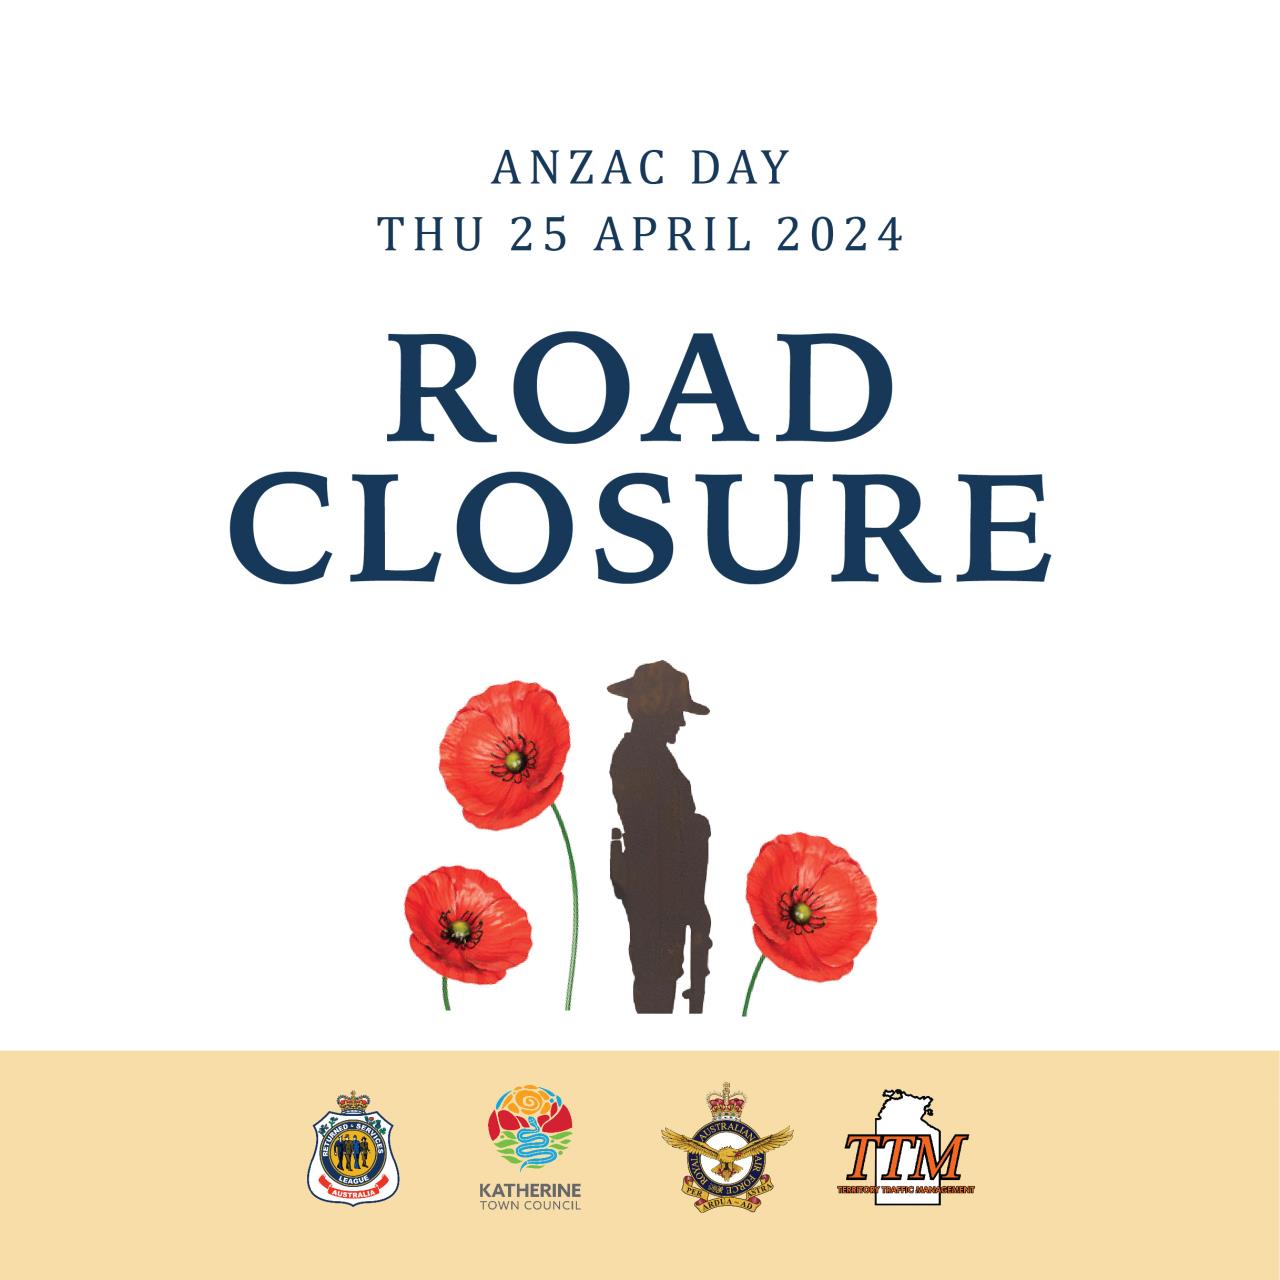 Media Release - Anzac Day Event Road Closures